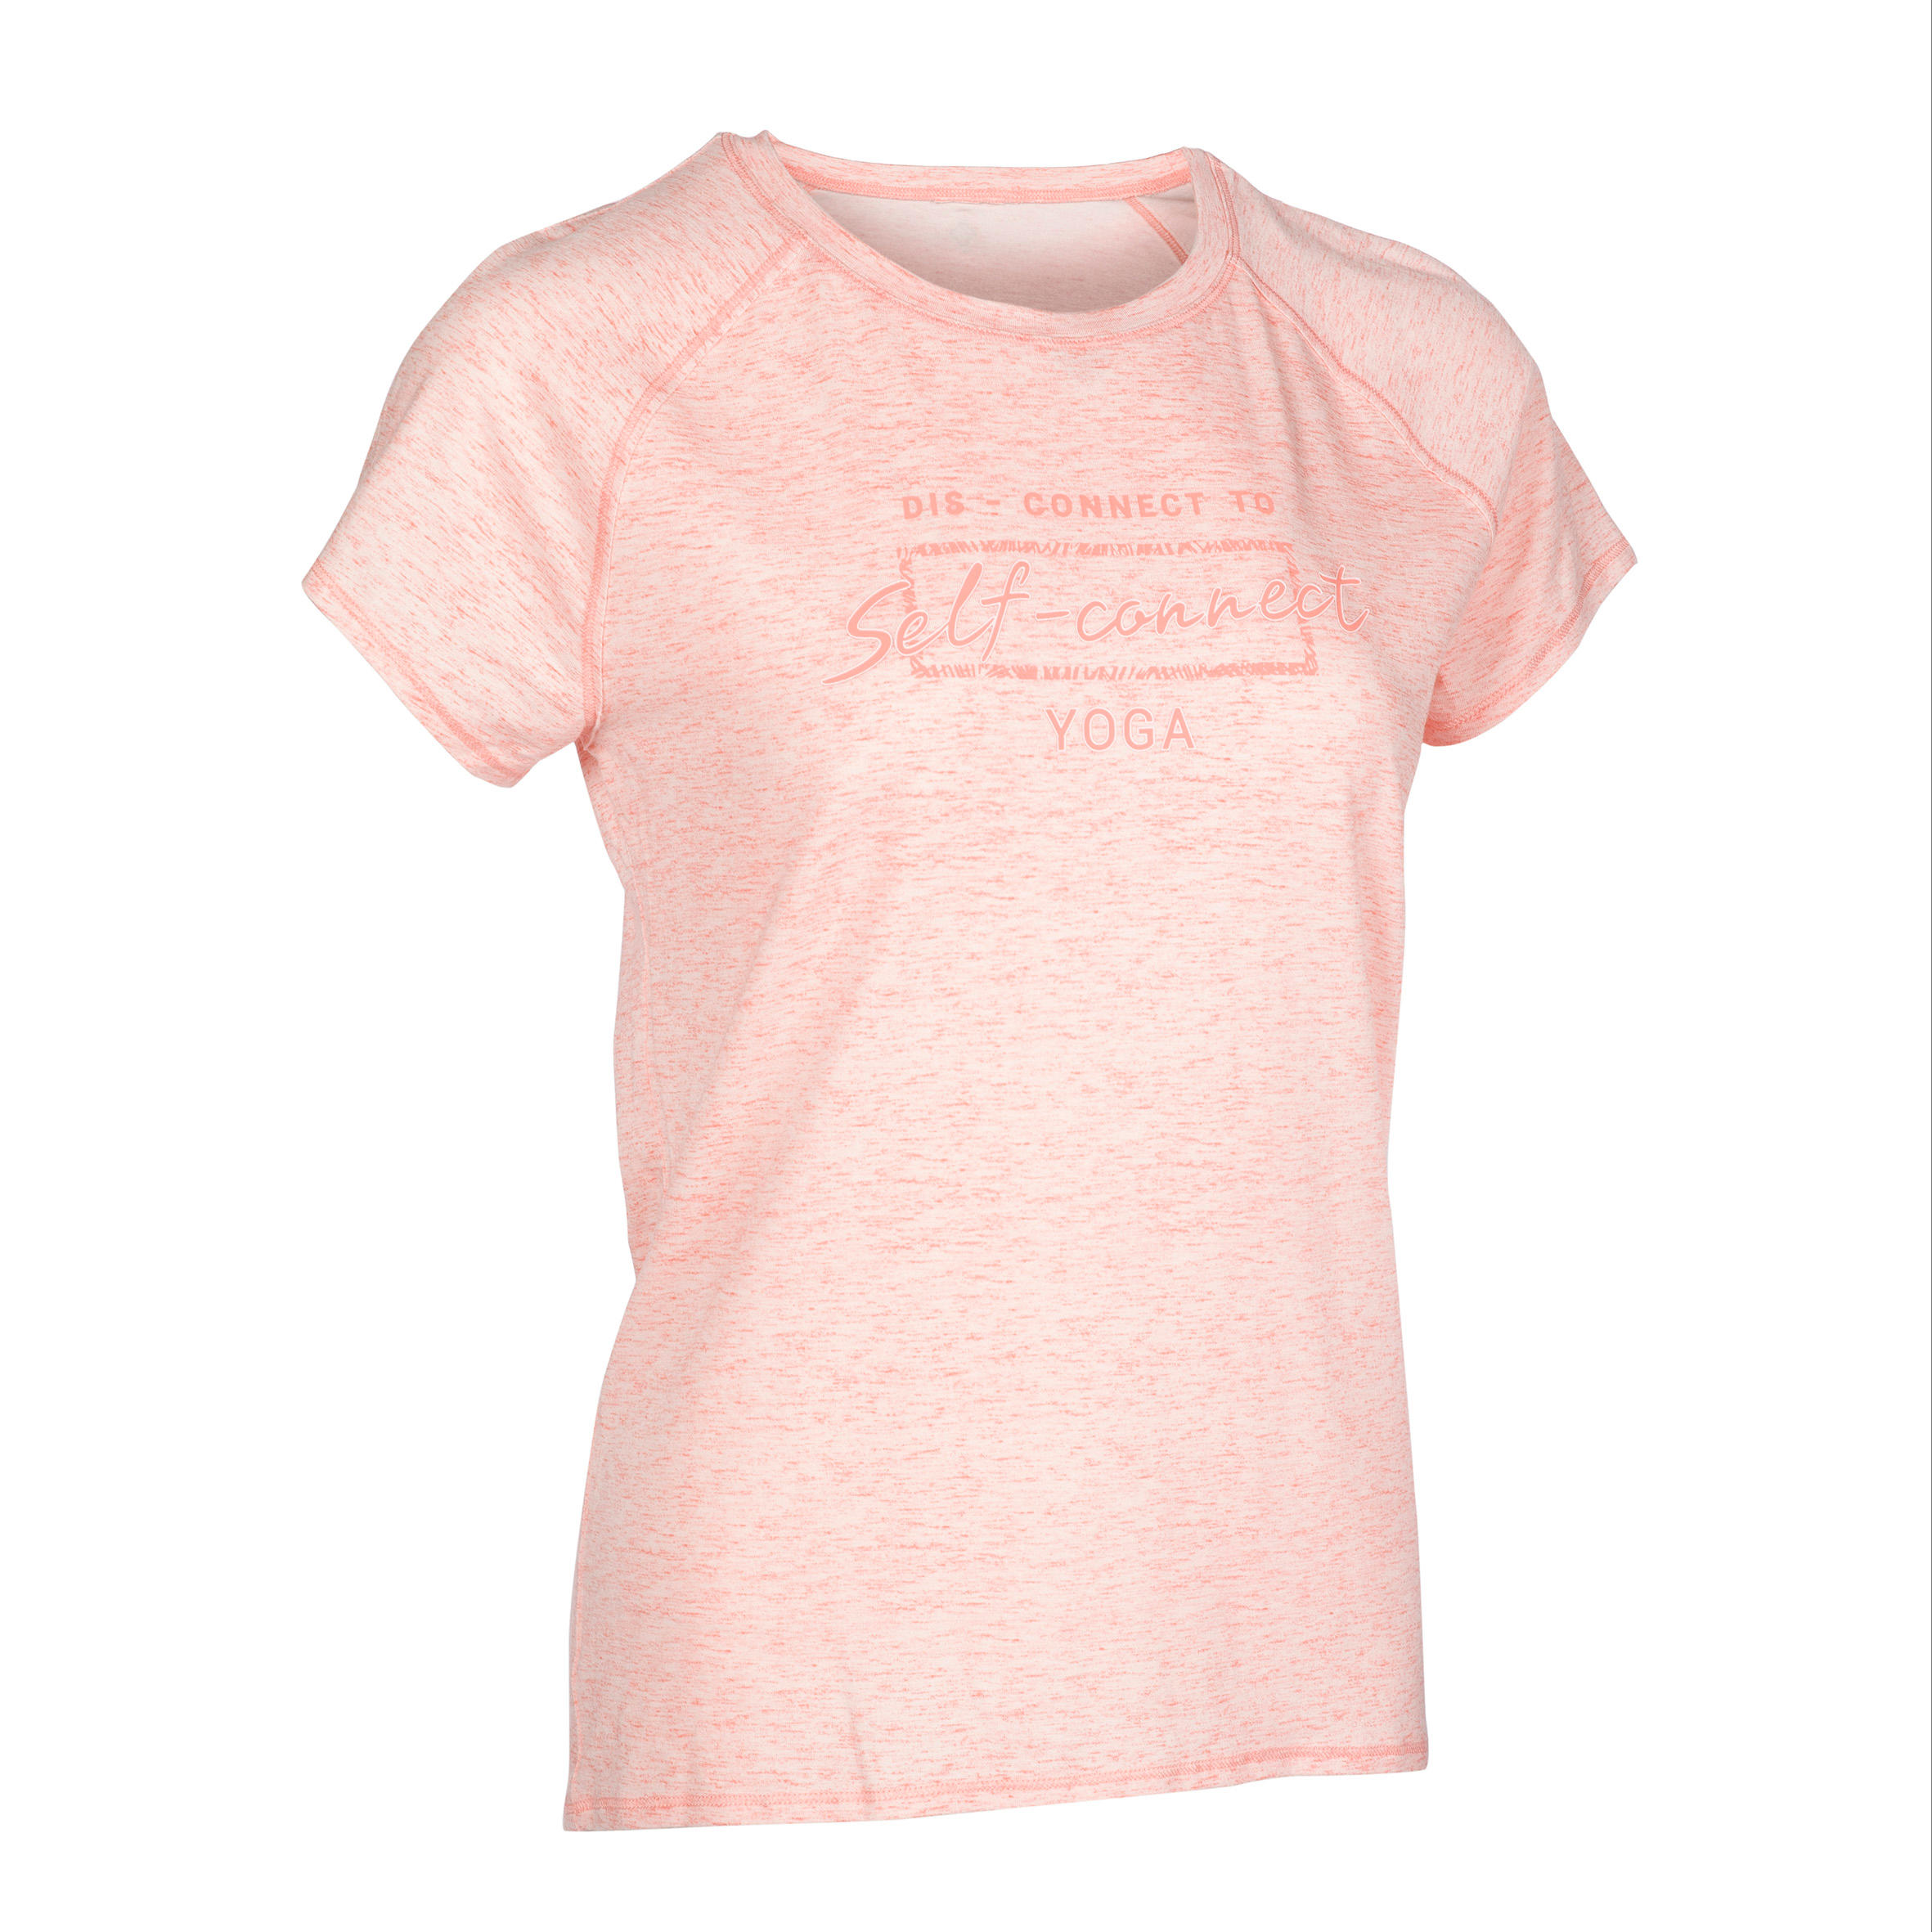 KIMJALY Women's Gentle Yoga T-Shirt - Coral